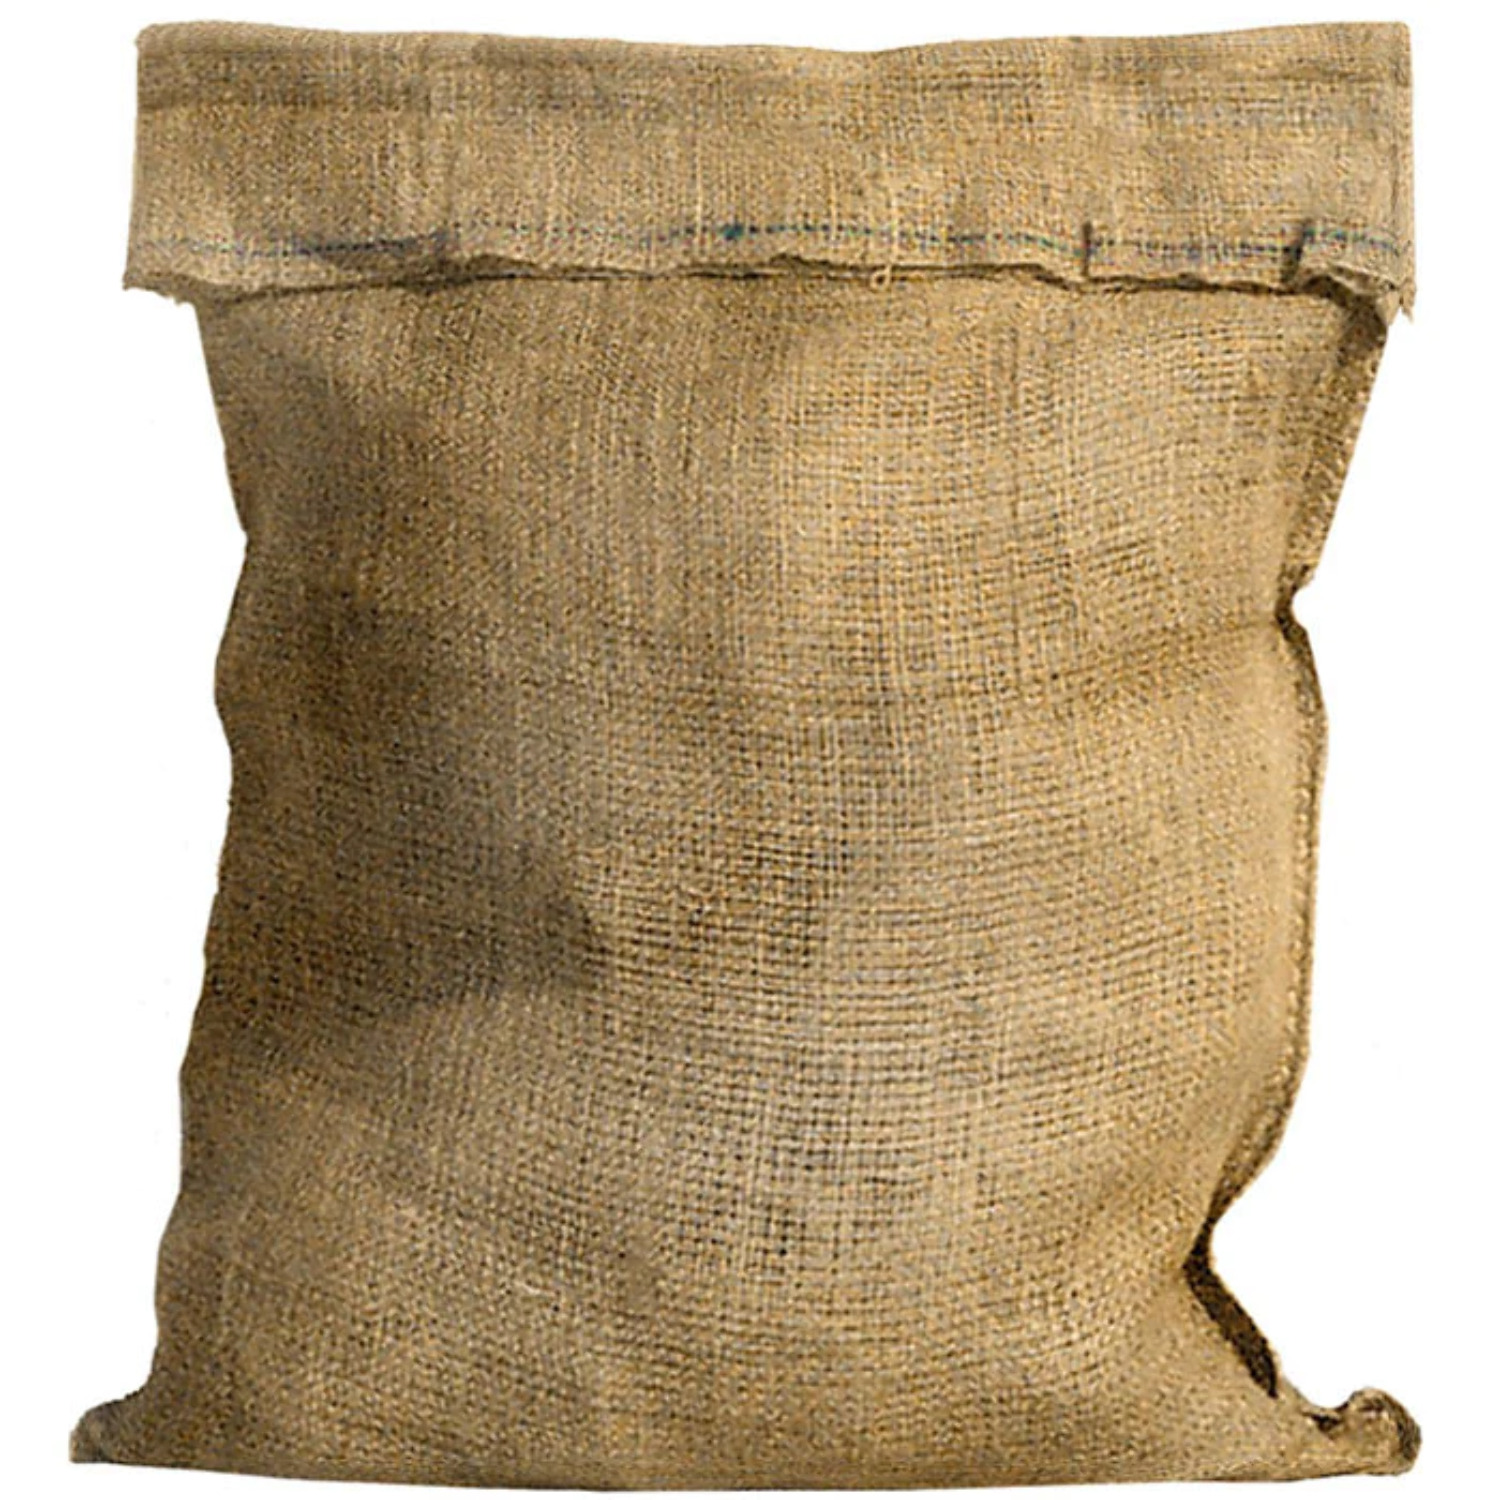 Burlap Bags - Classic Burlap Sacks - Haul or Store Nuts, Produce, or Animal Feed - Double-Stitched Seams - 24-inch wide by 39.5-inch tall - 5-count - image 1 of 1